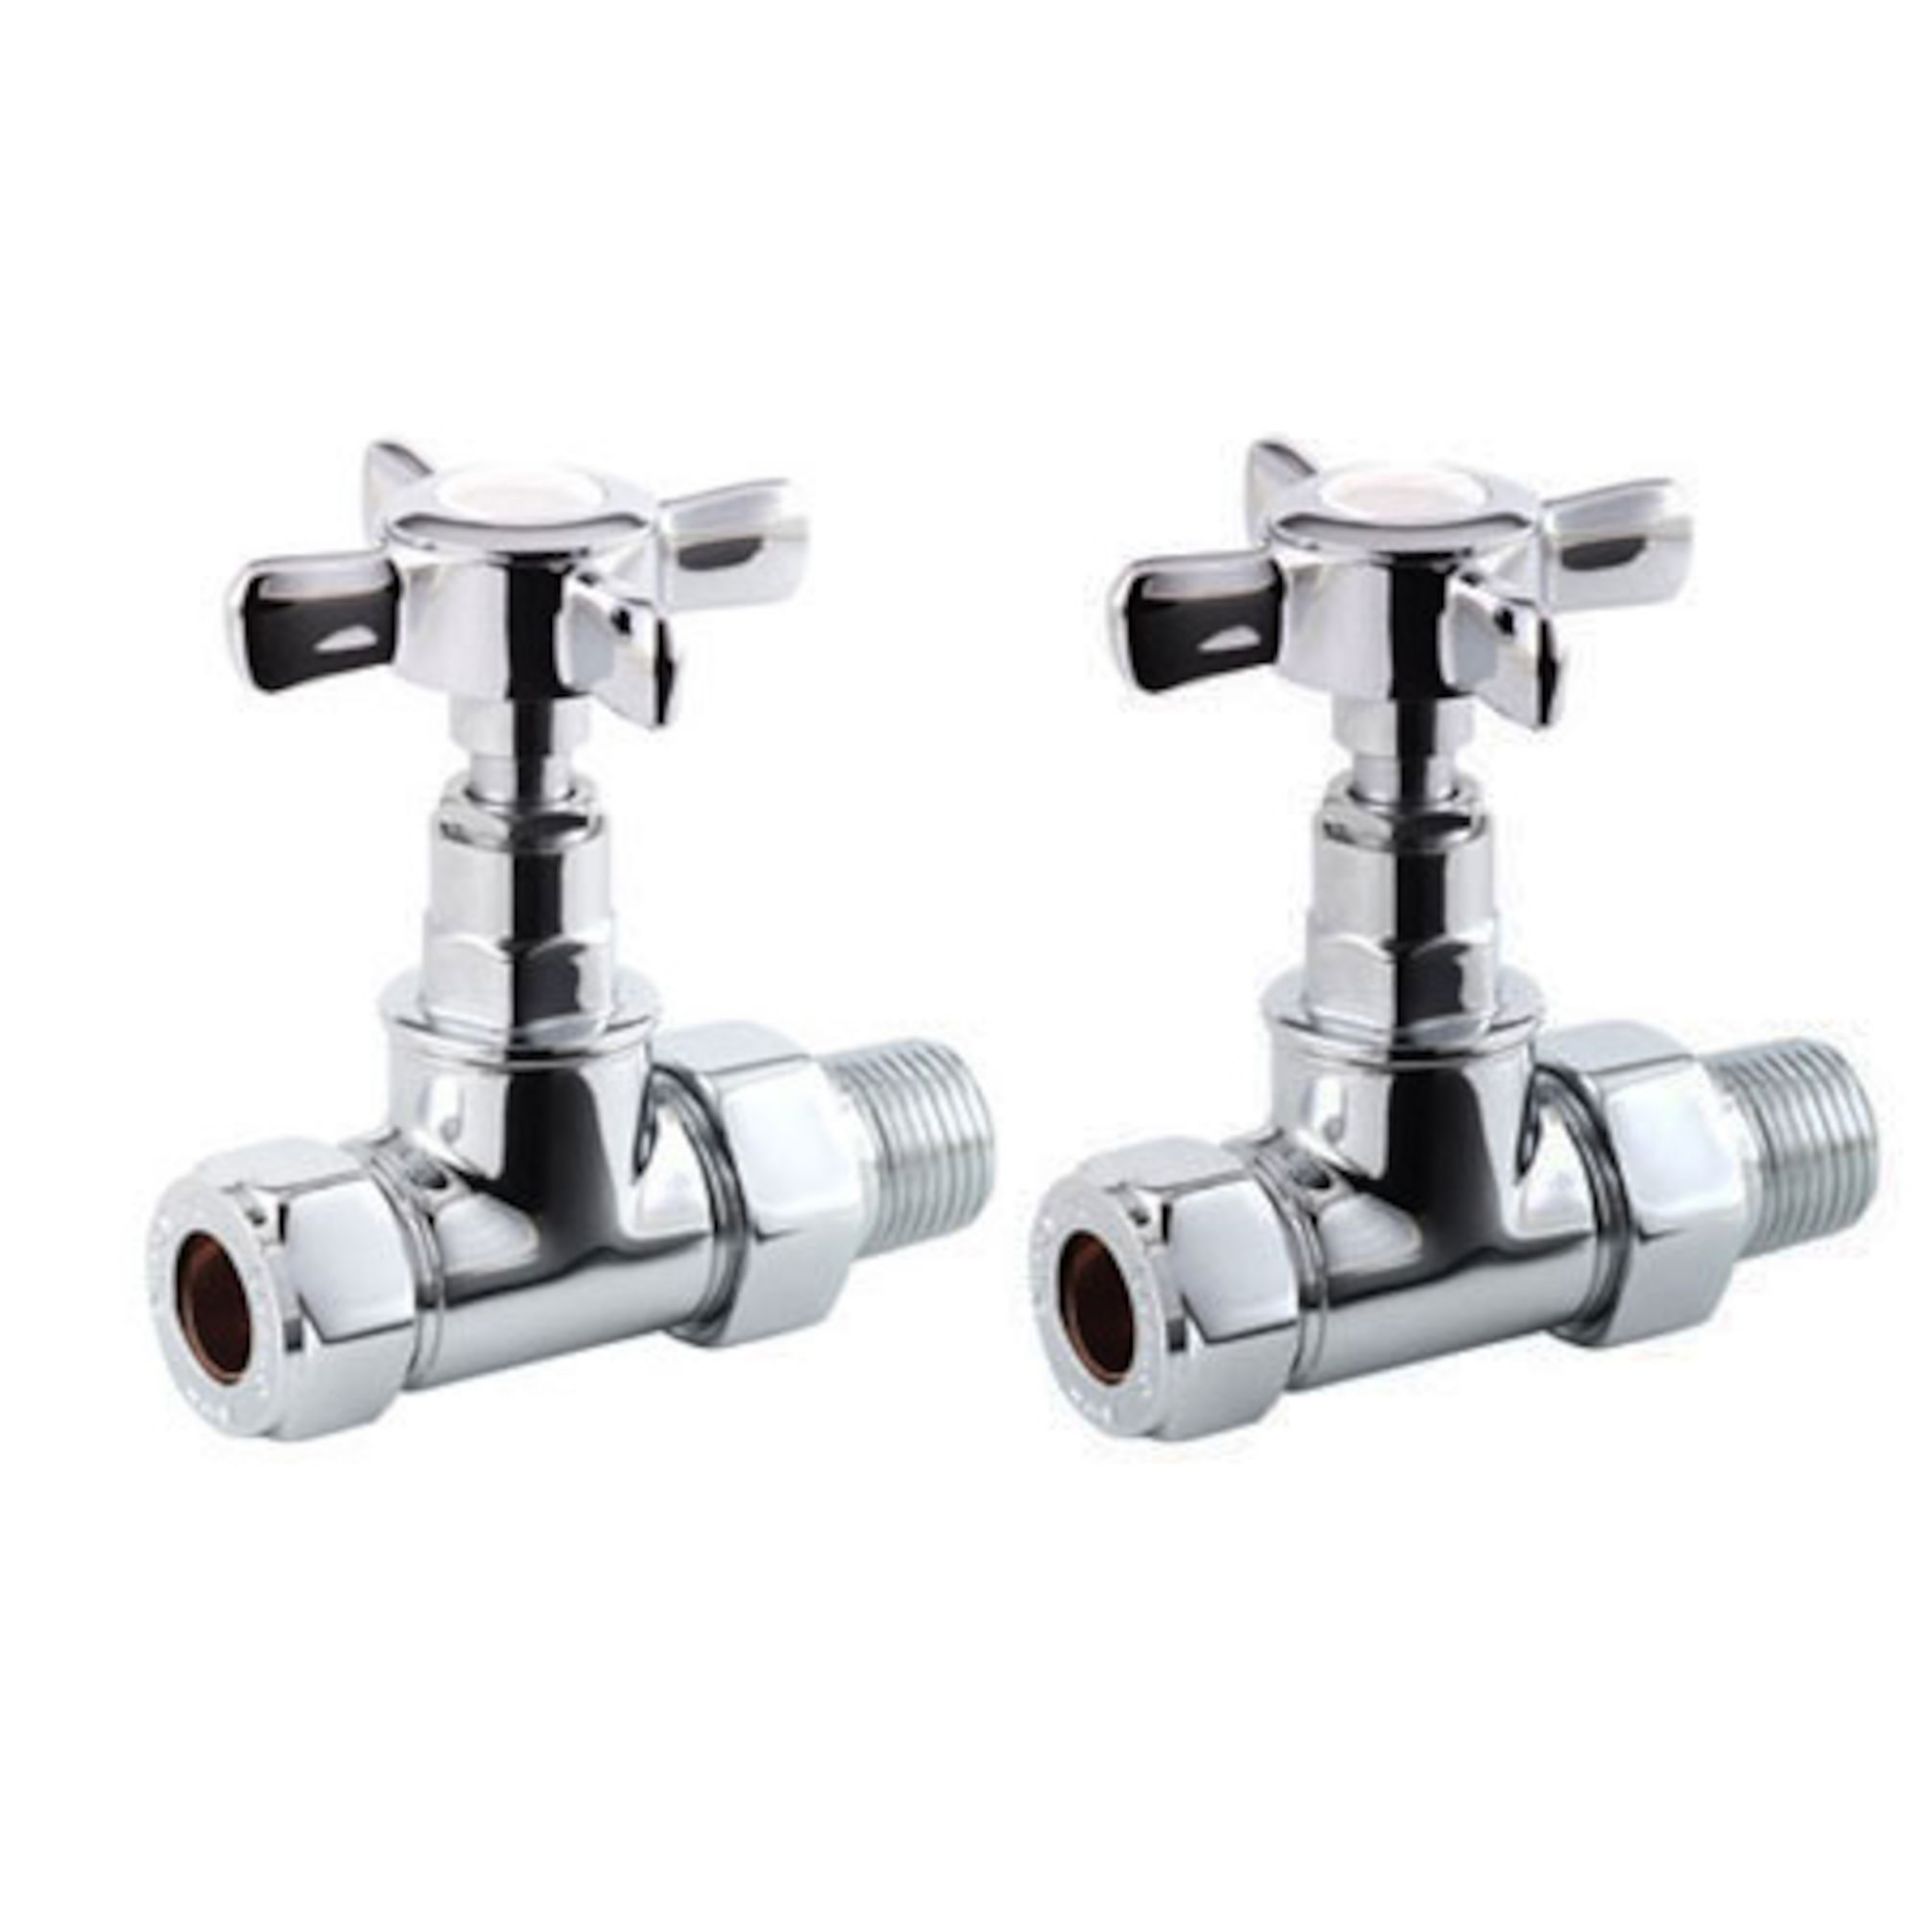 (R1036) 15mm Standard Connection Straight Polished Chrome Radiator Valves Chrome Plated Solid